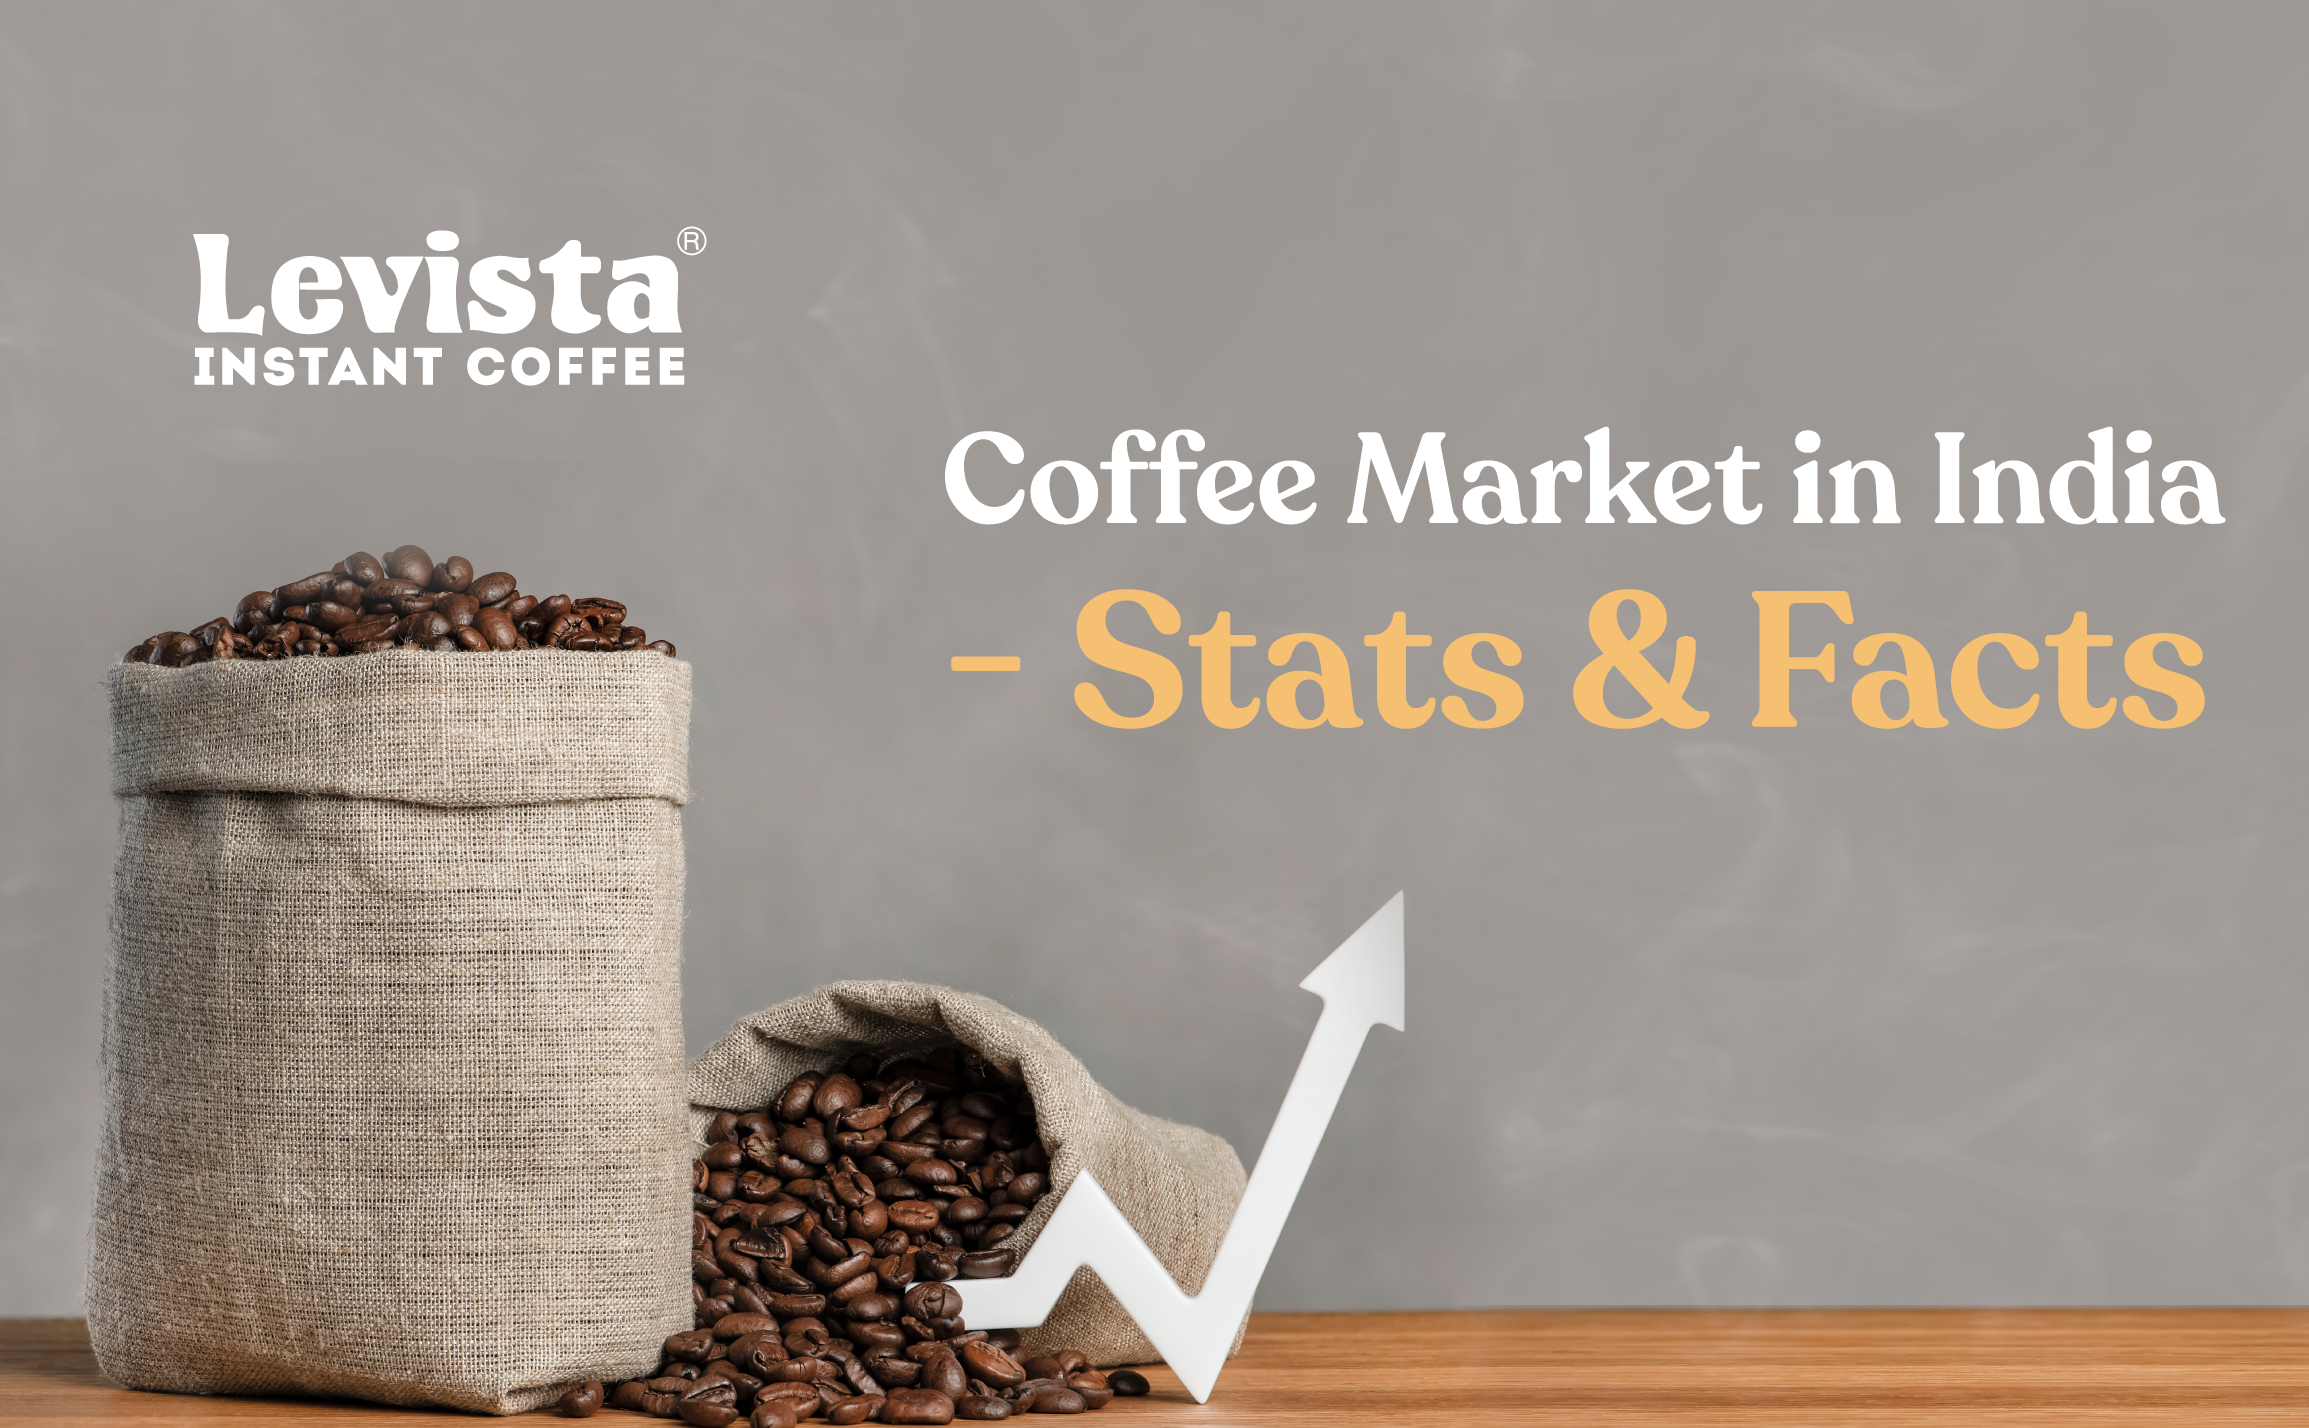 Coffee Market in India - Stats & Facts